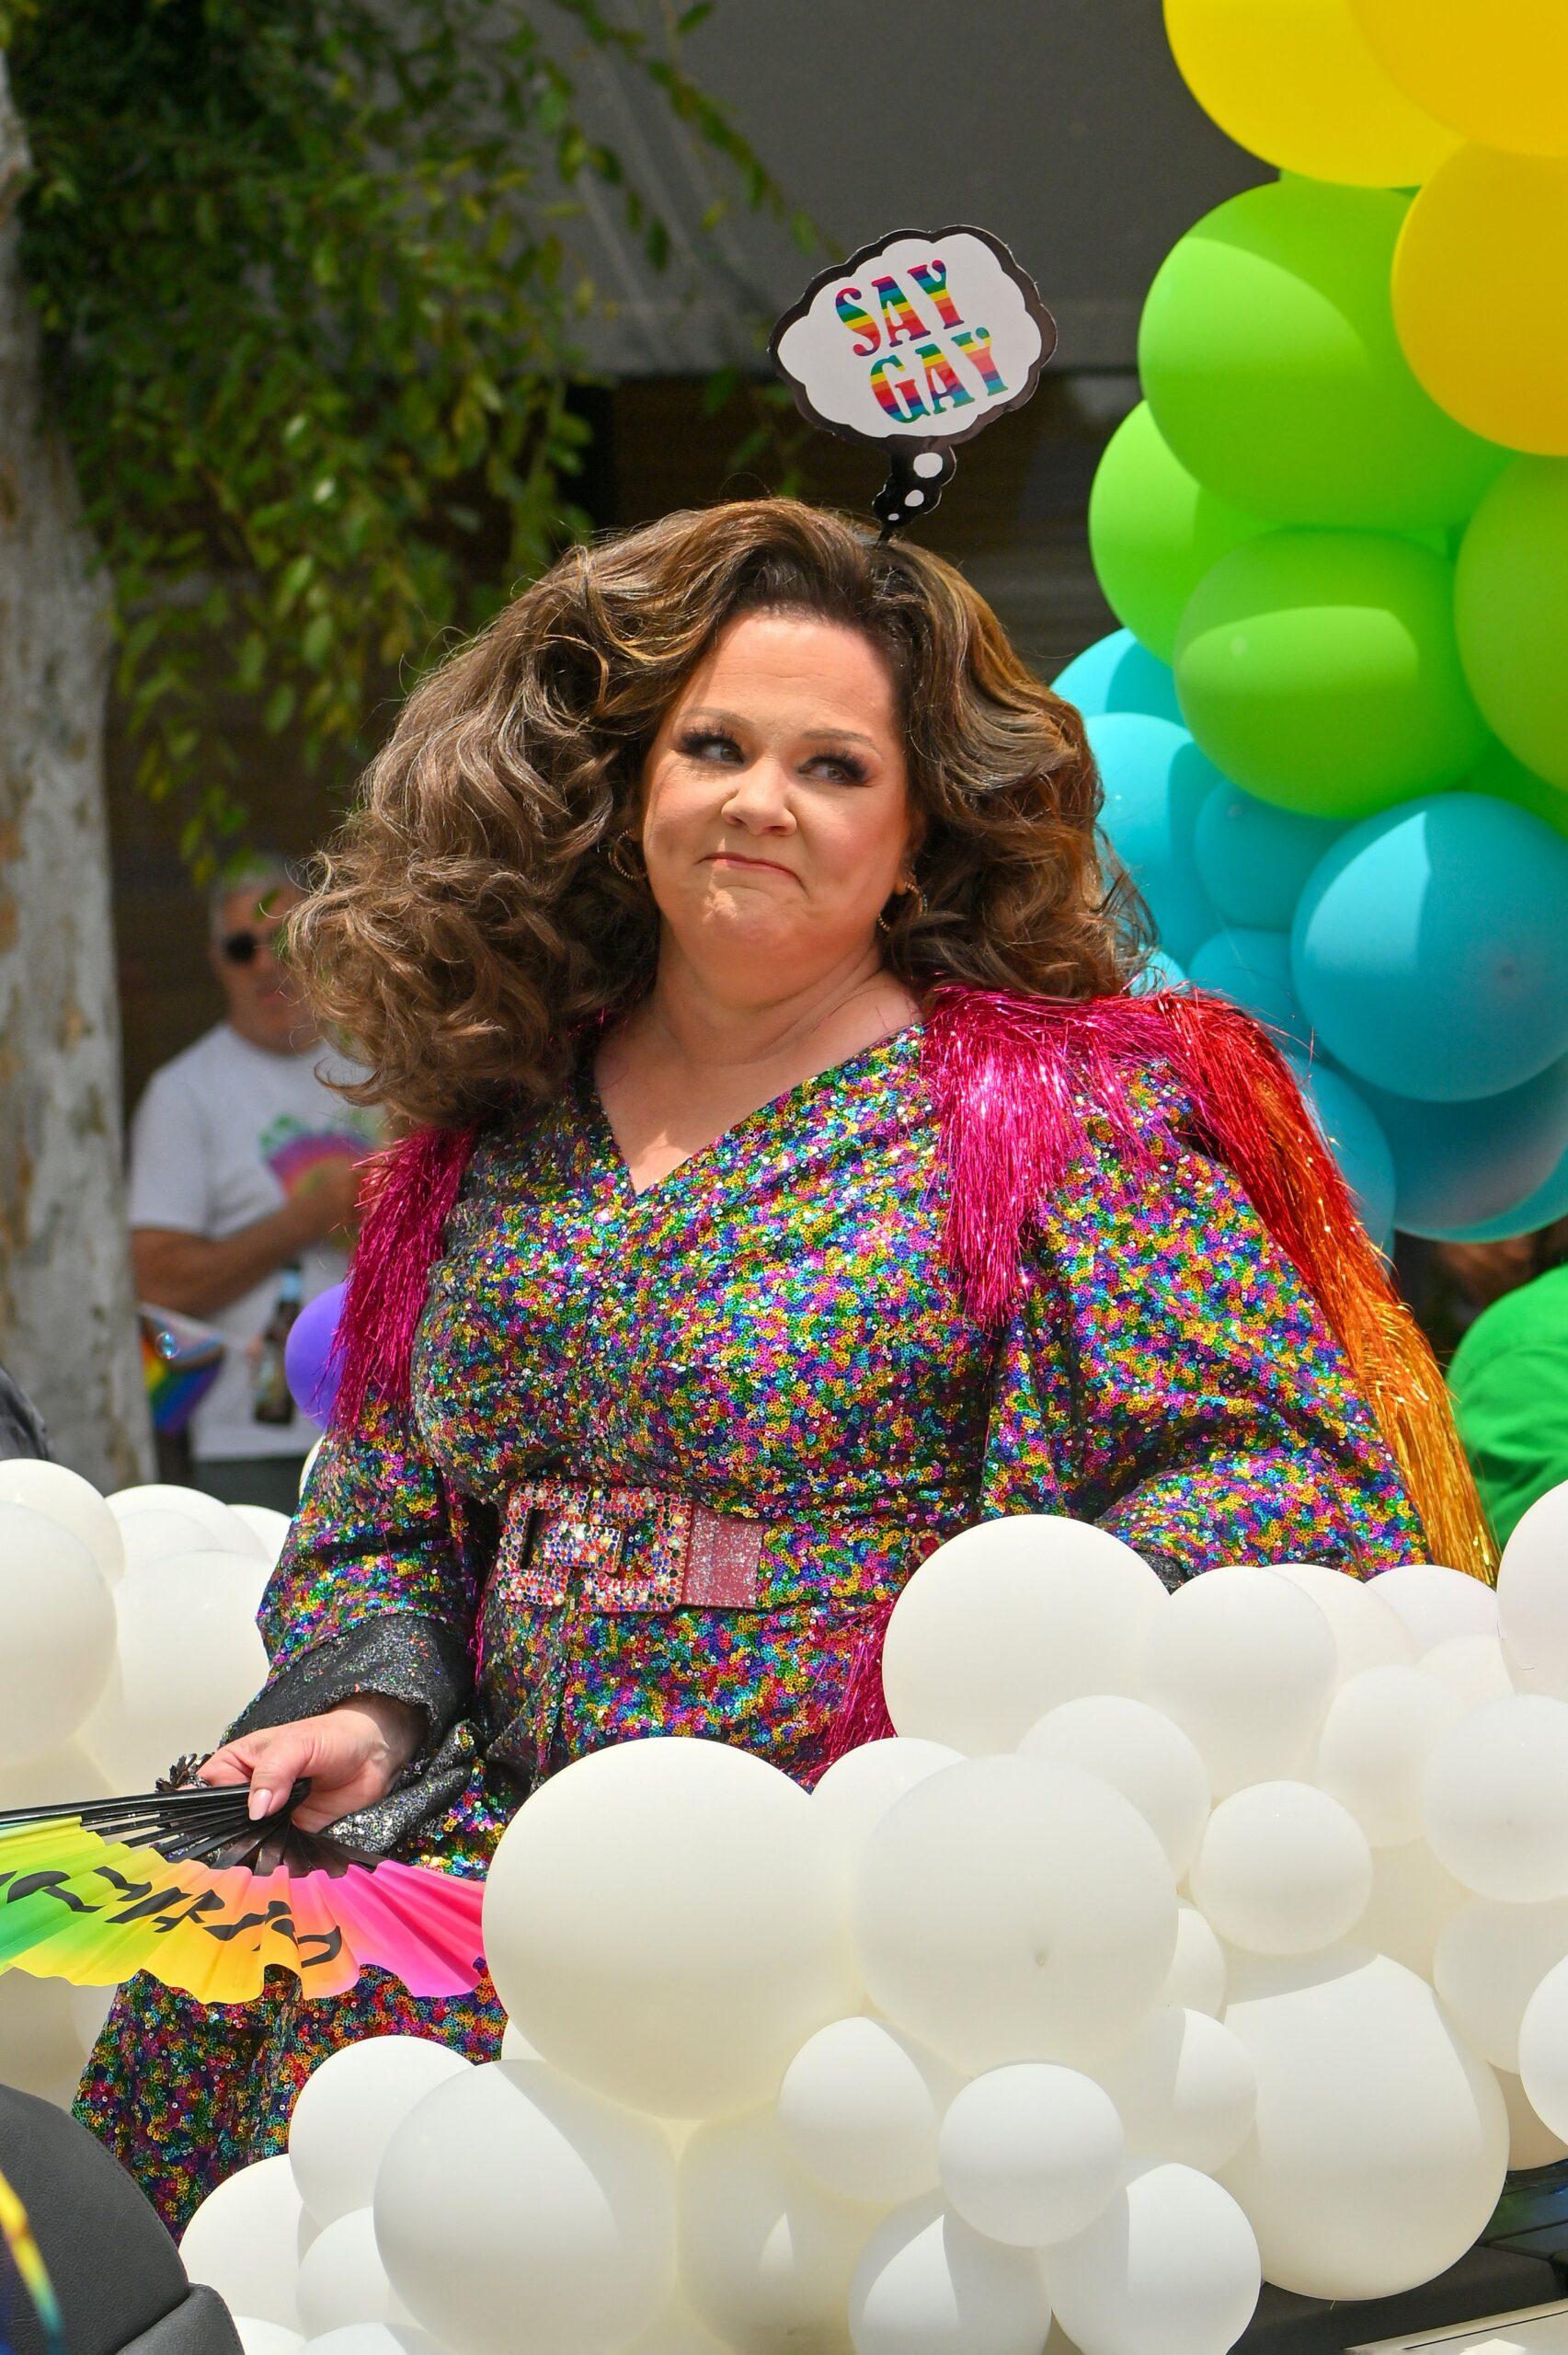 Melissa McCarthy wears a quot Say Gay apos headband as she takes part in the WeHo Pride